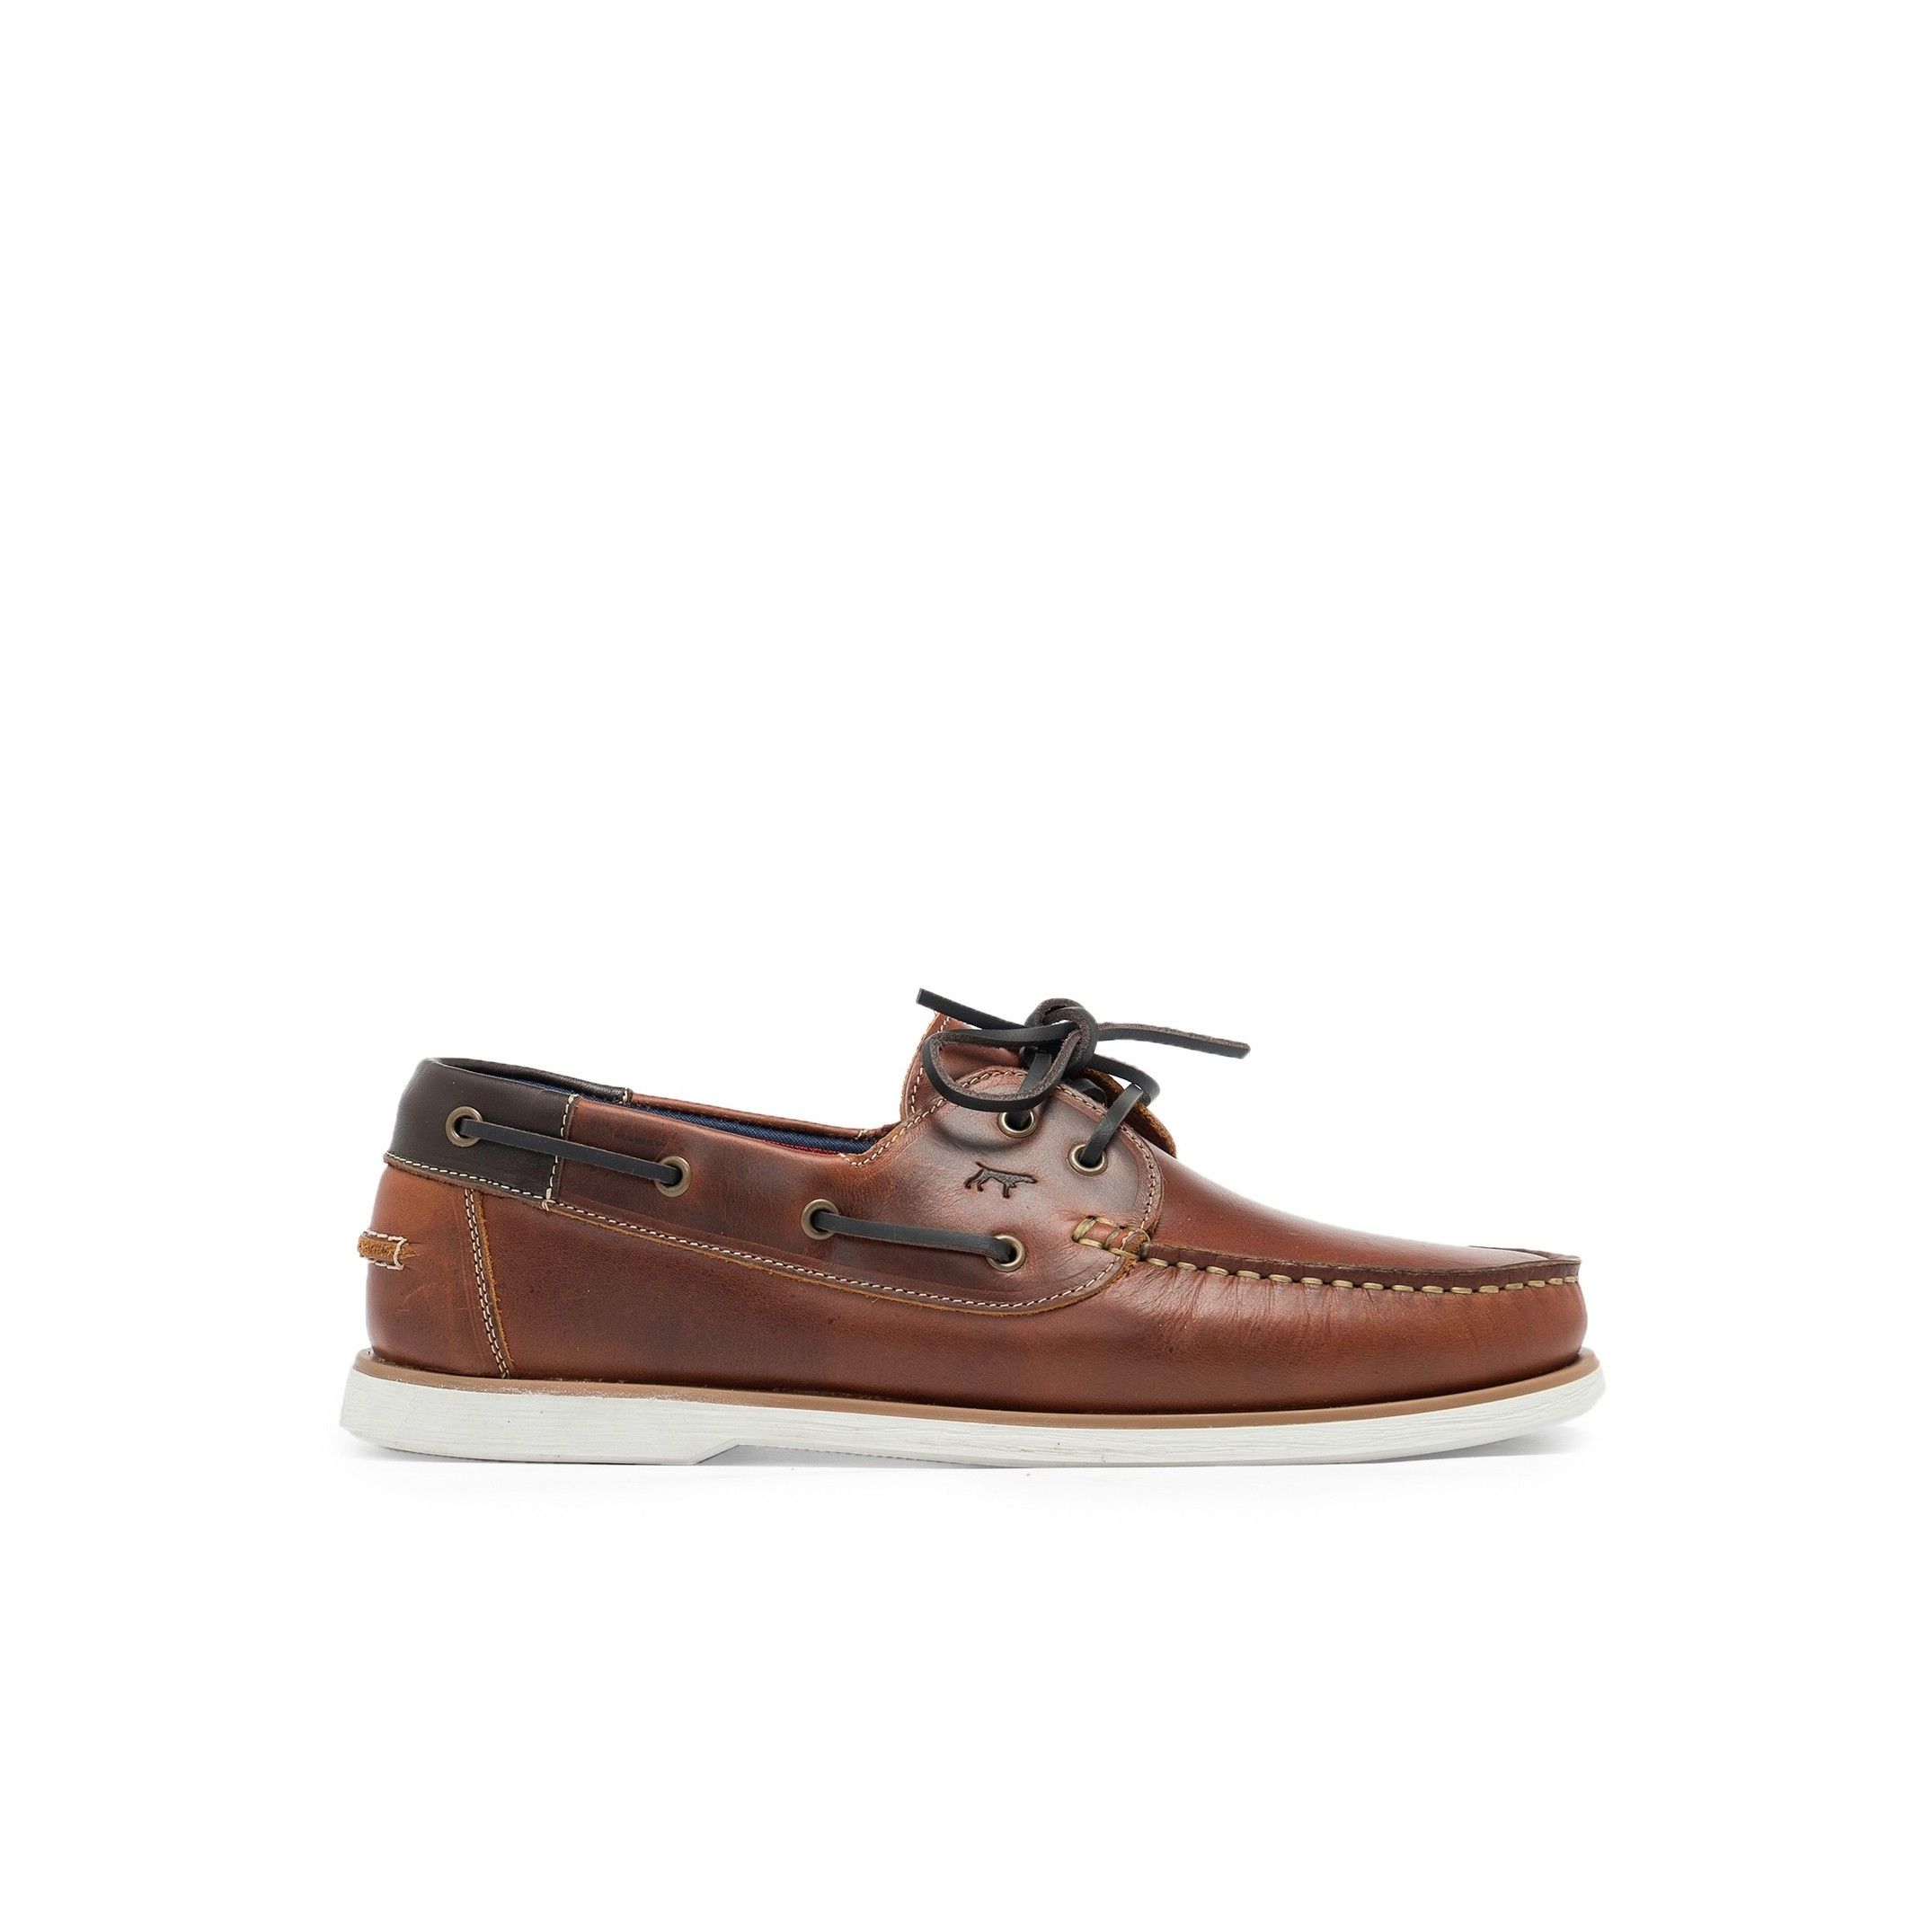 Leather boat shoes, by Son Castellanisimos. Upper made of cowhide leather. Leather laces closure. Inner and insole made of cowhide leather. Sole material: synthetic and non-slip. Heel height: 1,5 cm. Designed and made in Spain.